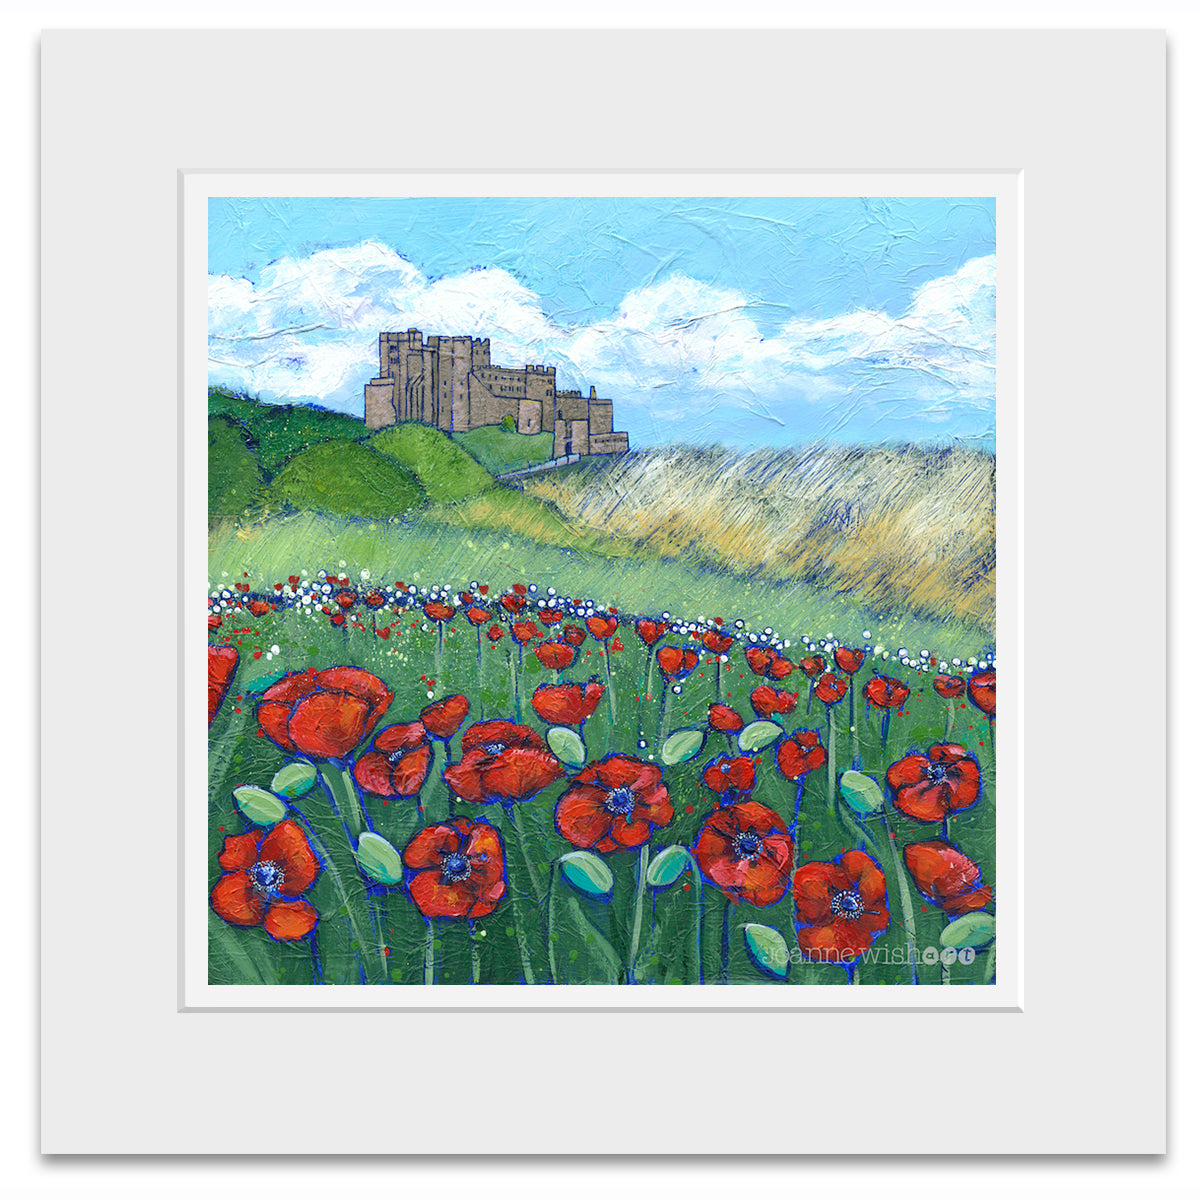 A mounted print of bamburgh castle with a swathe of bright red poppies in the dunes .